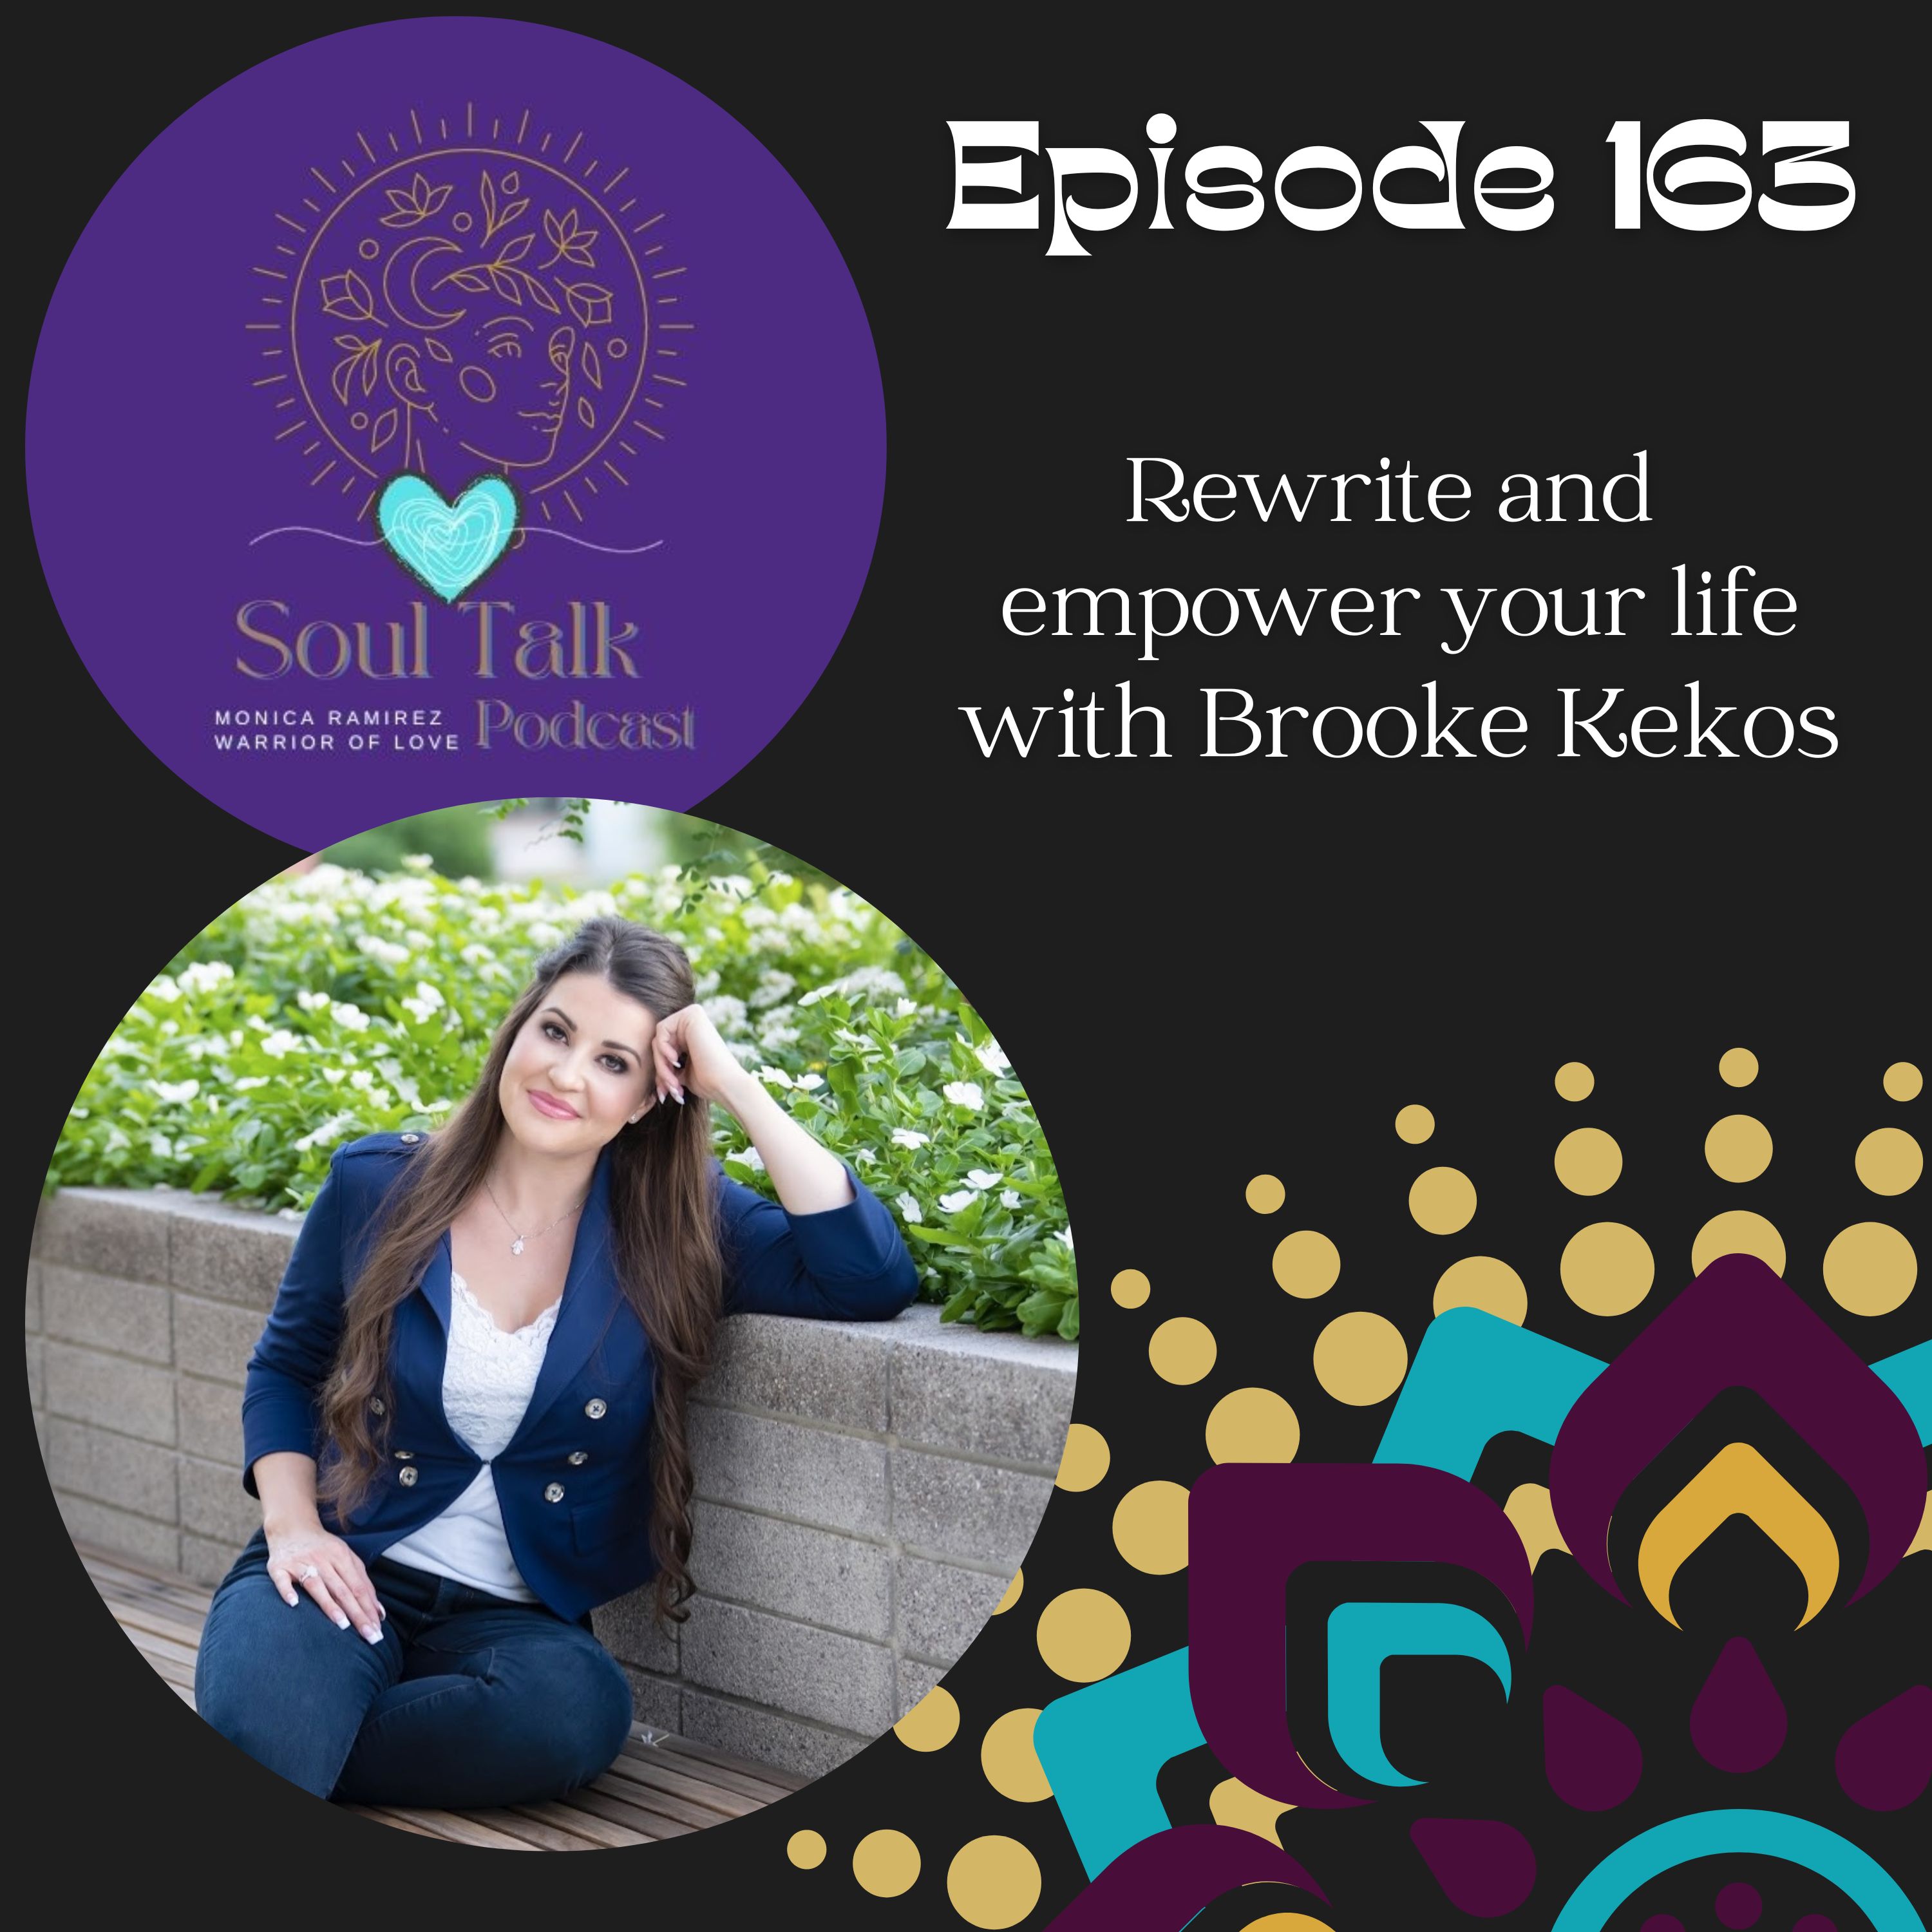 The Soul Talk Episode 163: Rewrite and empower your life